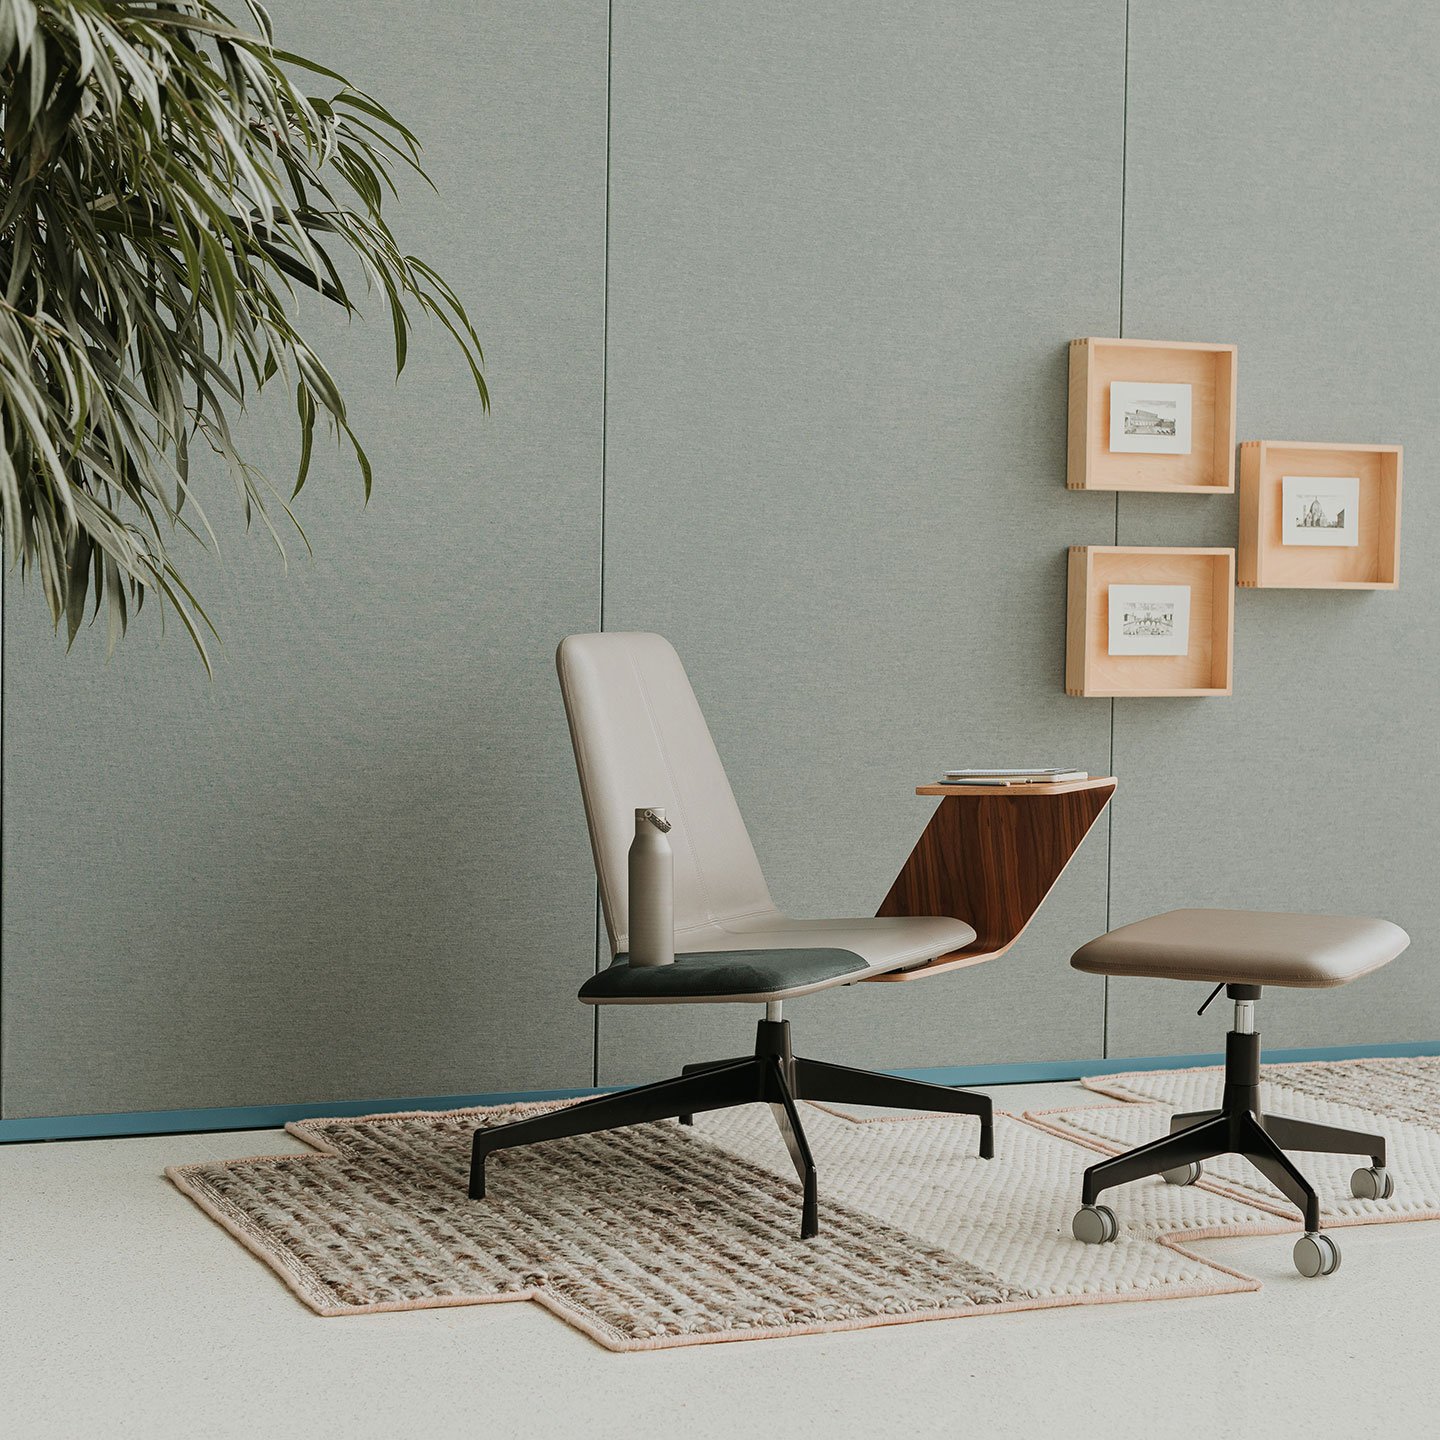 Haworth Harbor work lounge chair with attached study table in grey upholstery with a wheeled stool in a office space